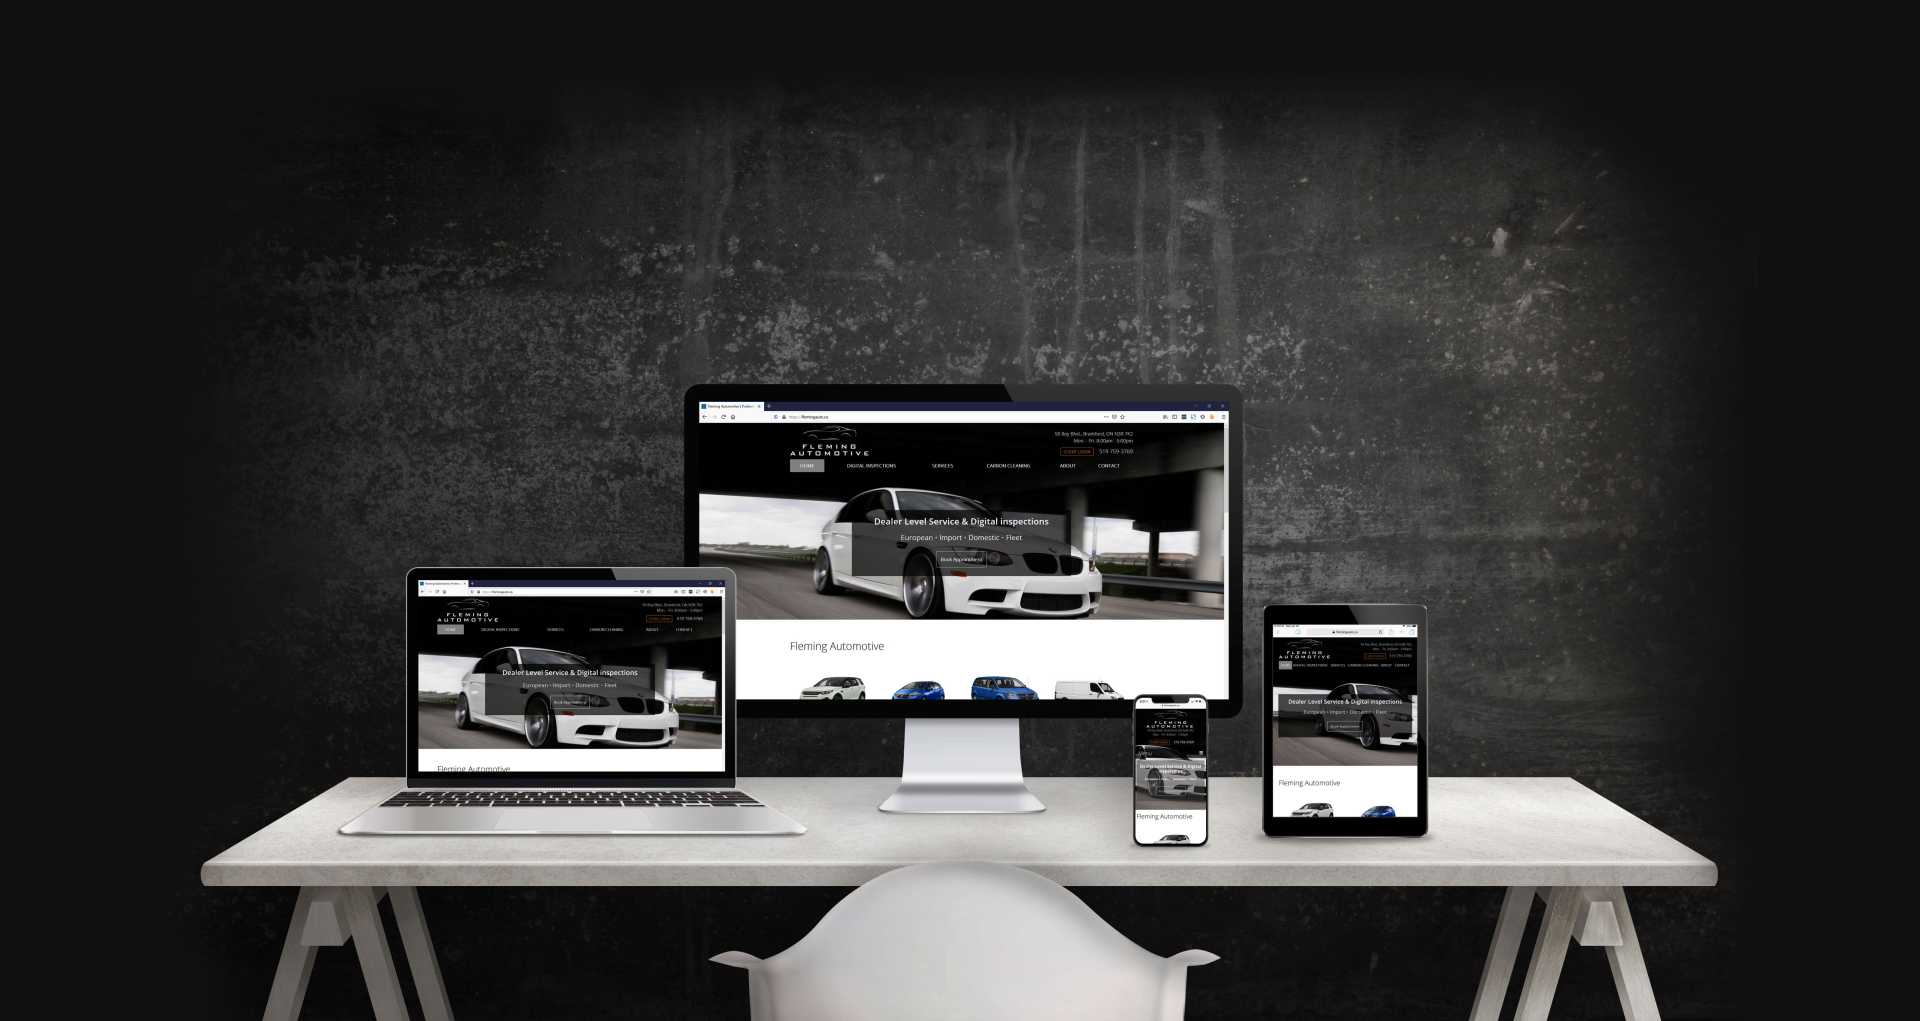 Mockup of the Fleming Automotive website showing desktop, laptop, iPad, and iPhone web layout.